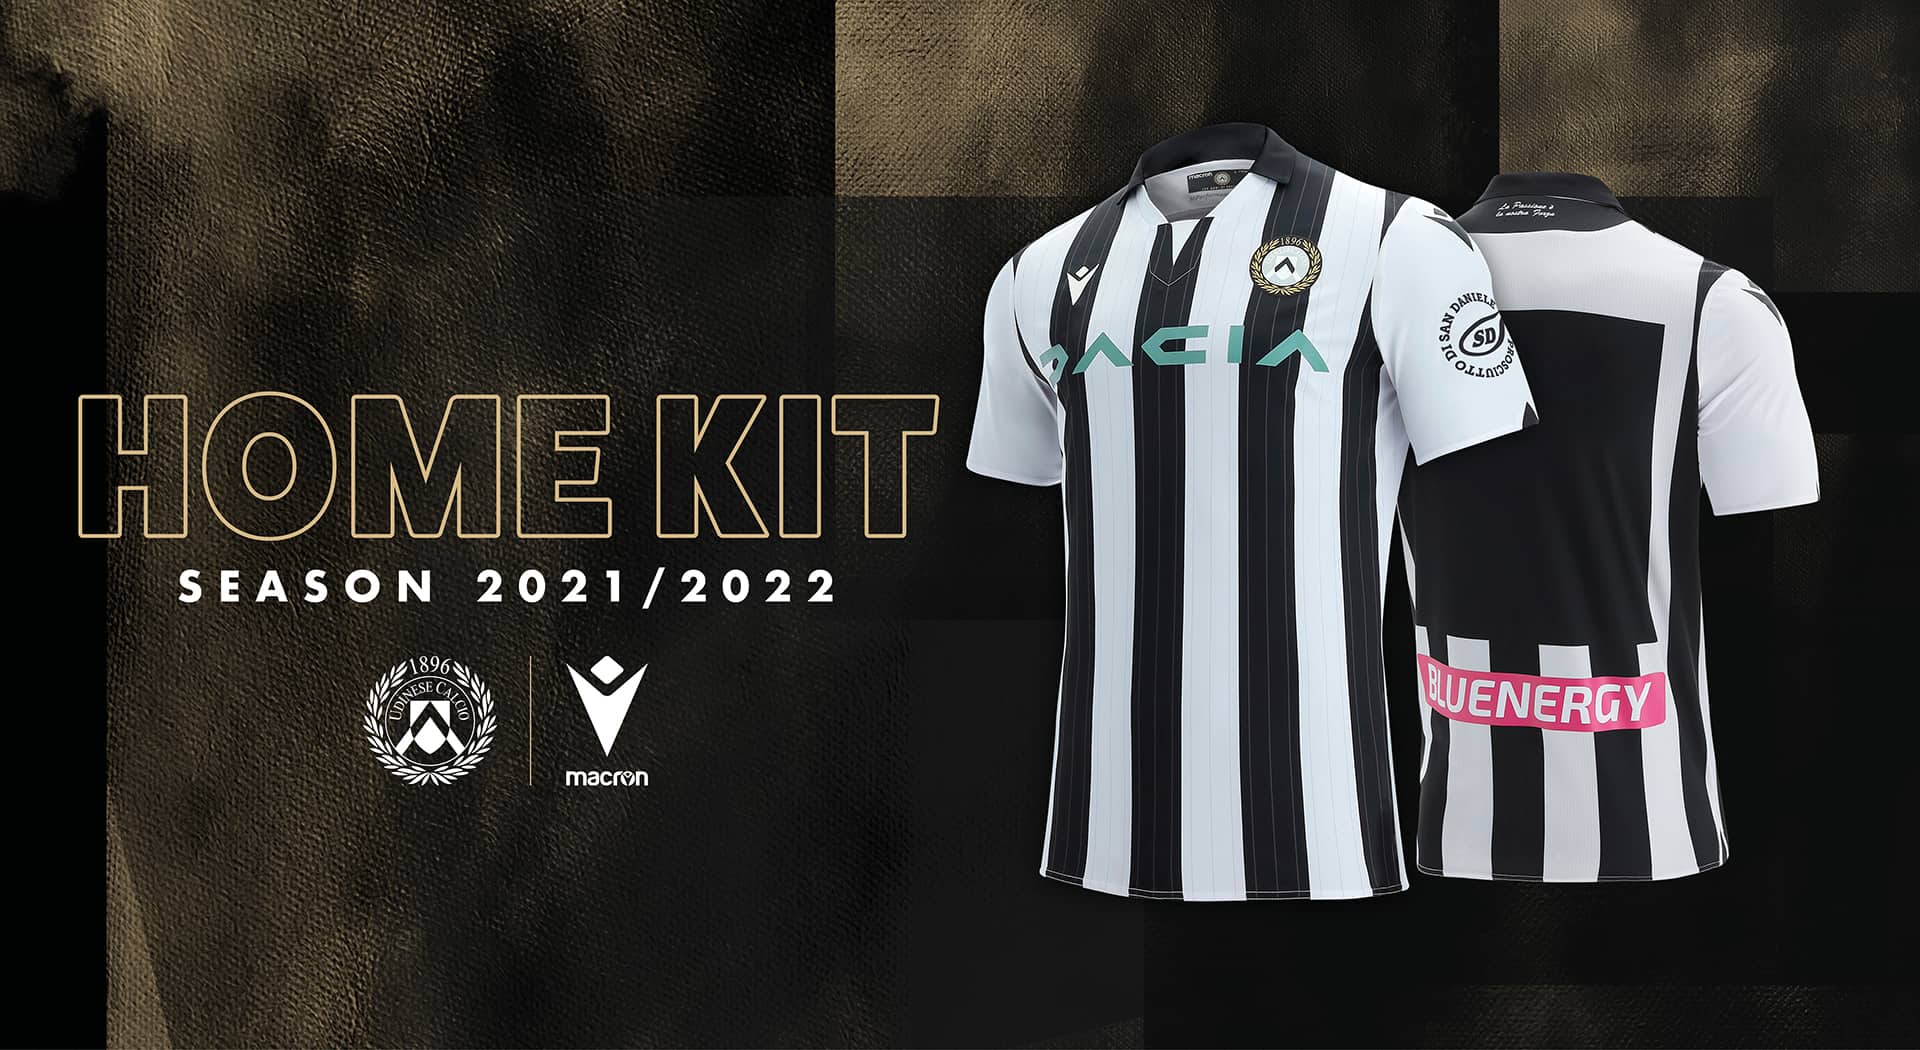 Traditional black & white with an elegant in new Macron-made Udinese Calcio home